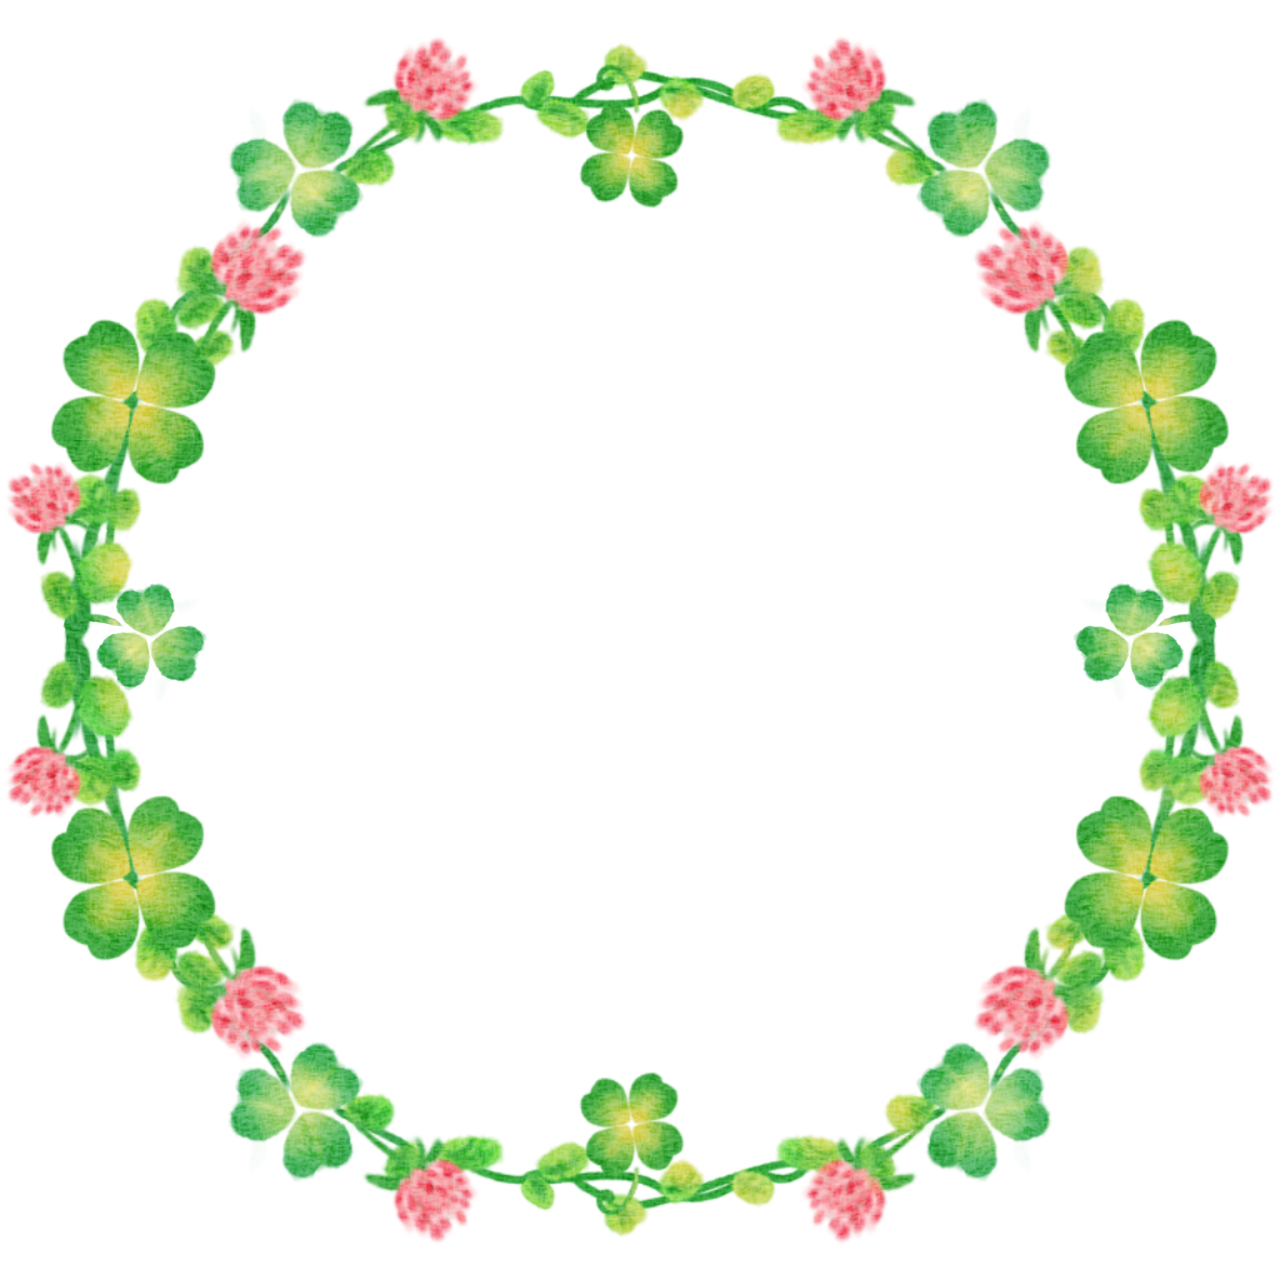 floral clover wreath free photo